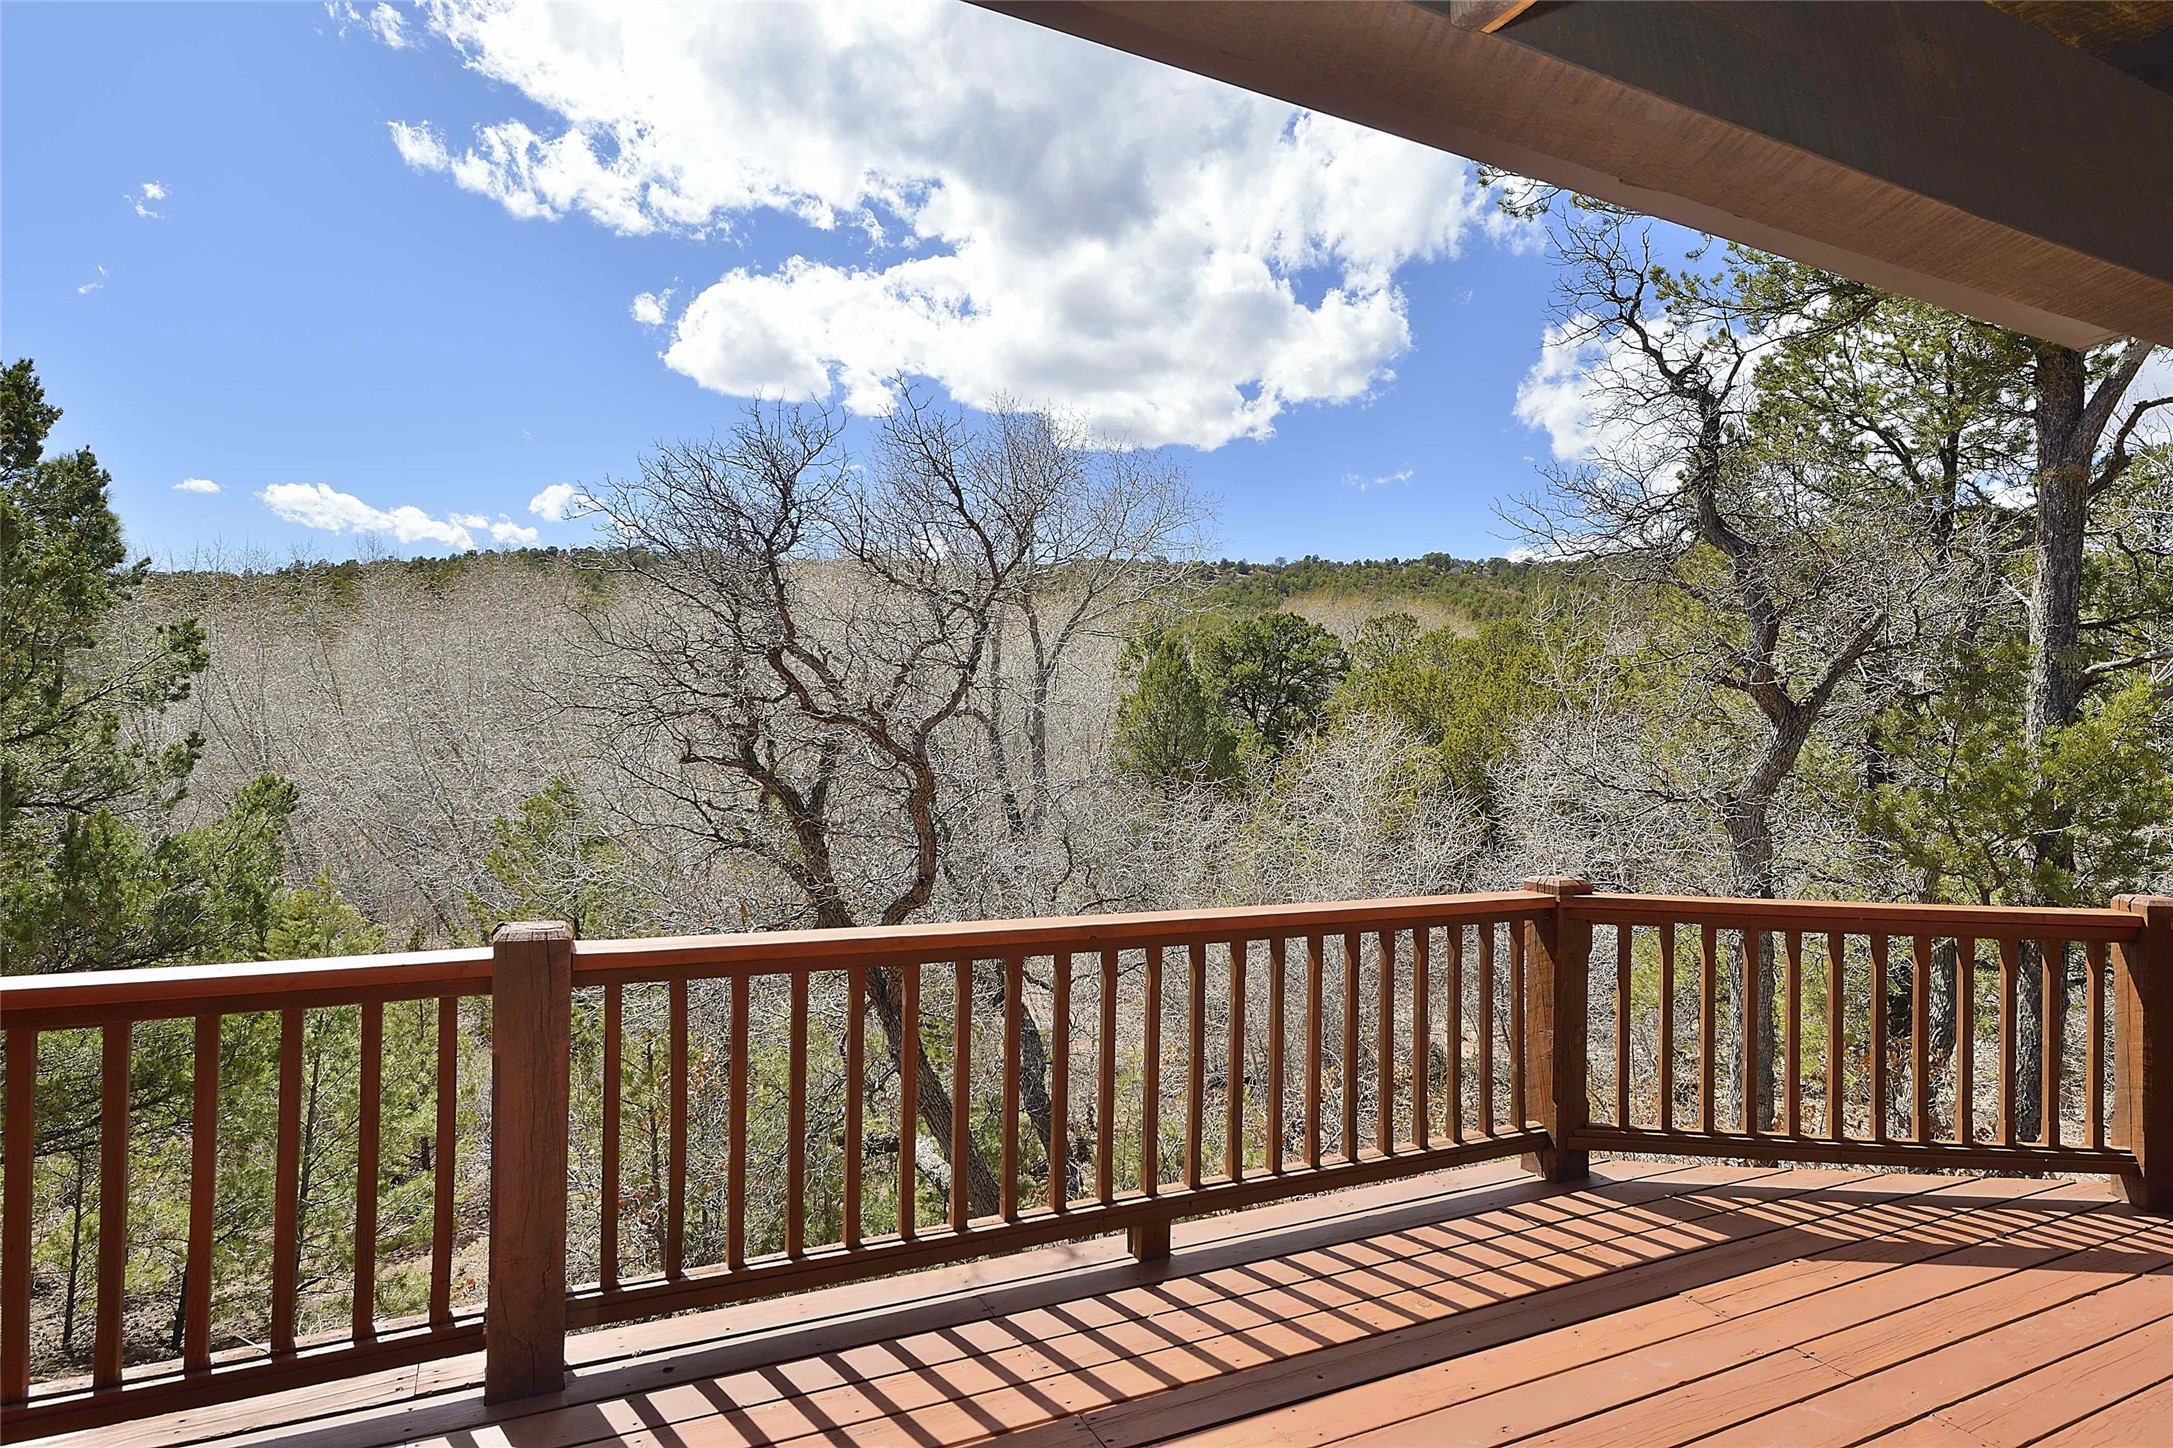 38 Johnsons Ranch, Santa Fe, New Mexico 87505, 3 Bedrooms Bedrooms, ,4 BathroomsBathrooms,Residential,For Sale,38 Johnsons Ranch,202338110